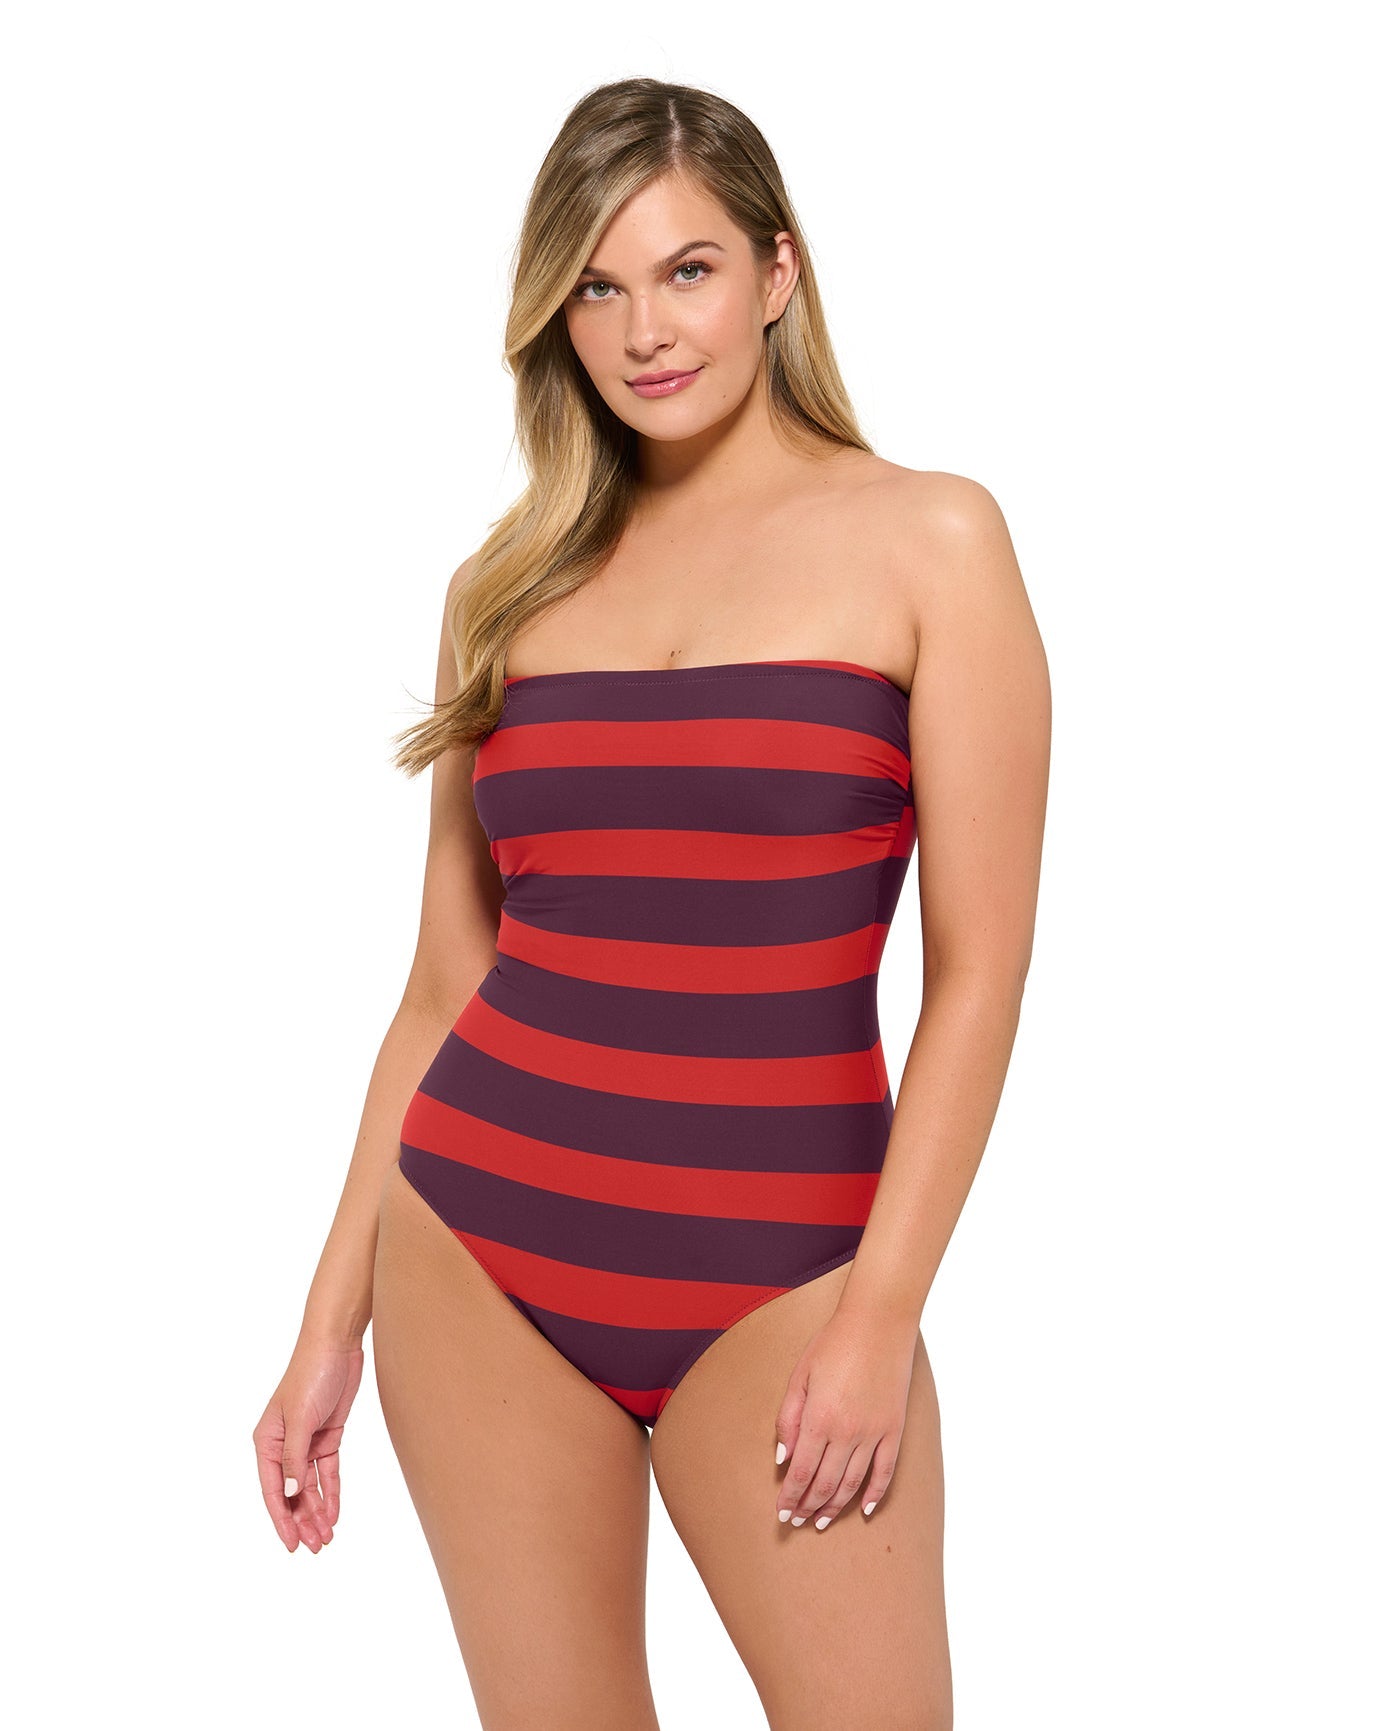 Front View Of Gottex Roses Are Red Dd-Cup Bandeau One Piece Swimsuit | Gottex Roses Are Red Stripes